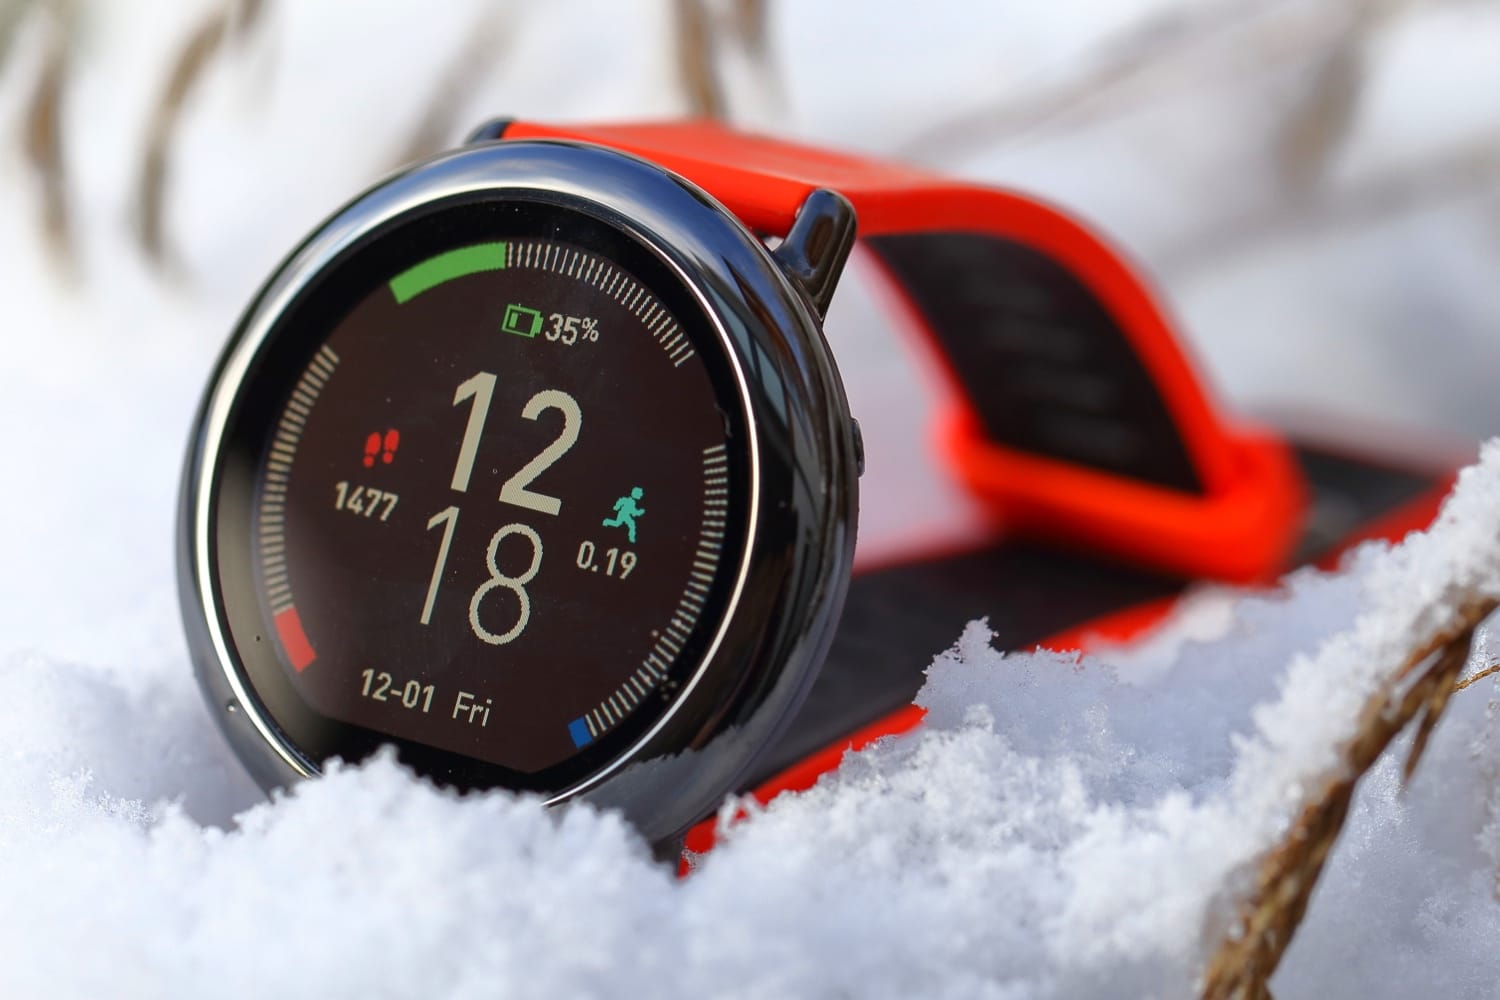 Smart watch from Xiaomi Amazfit Pace - advantages and disadvantages